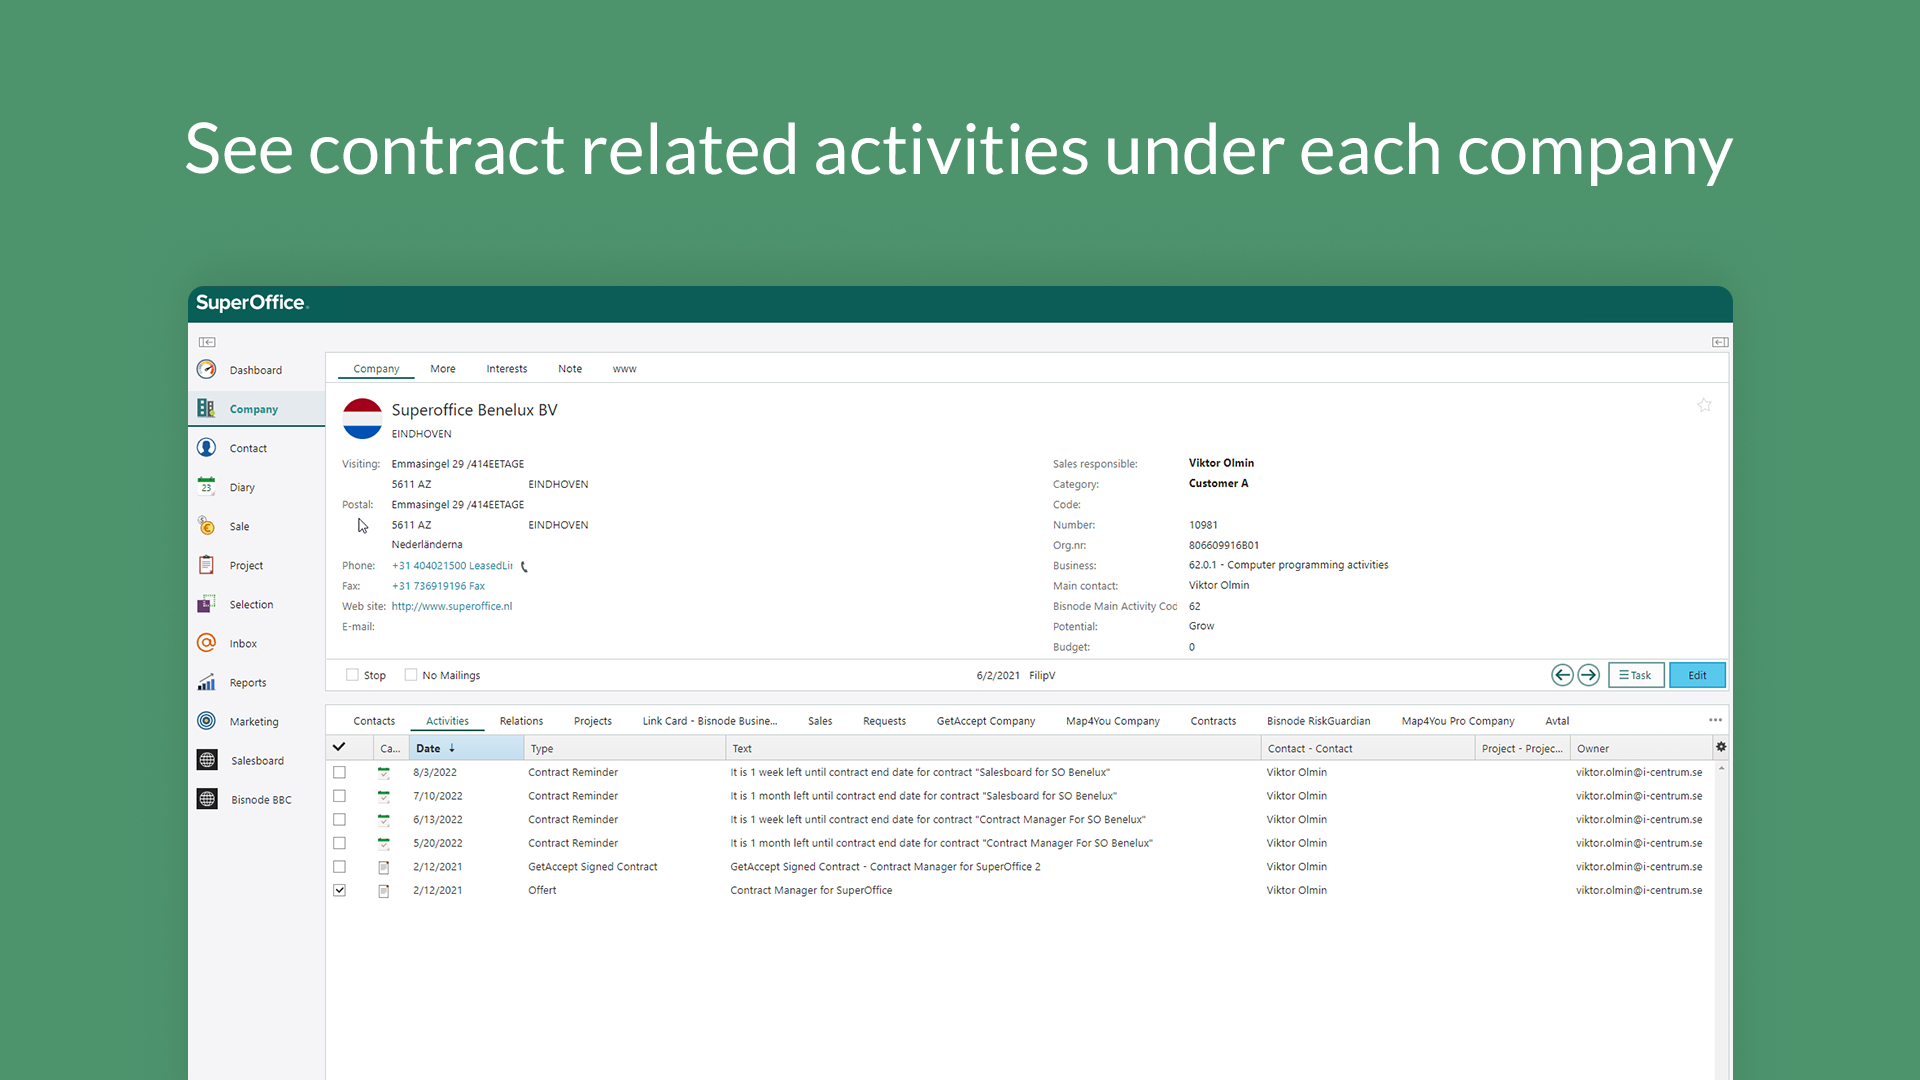 See contract related activities under each company